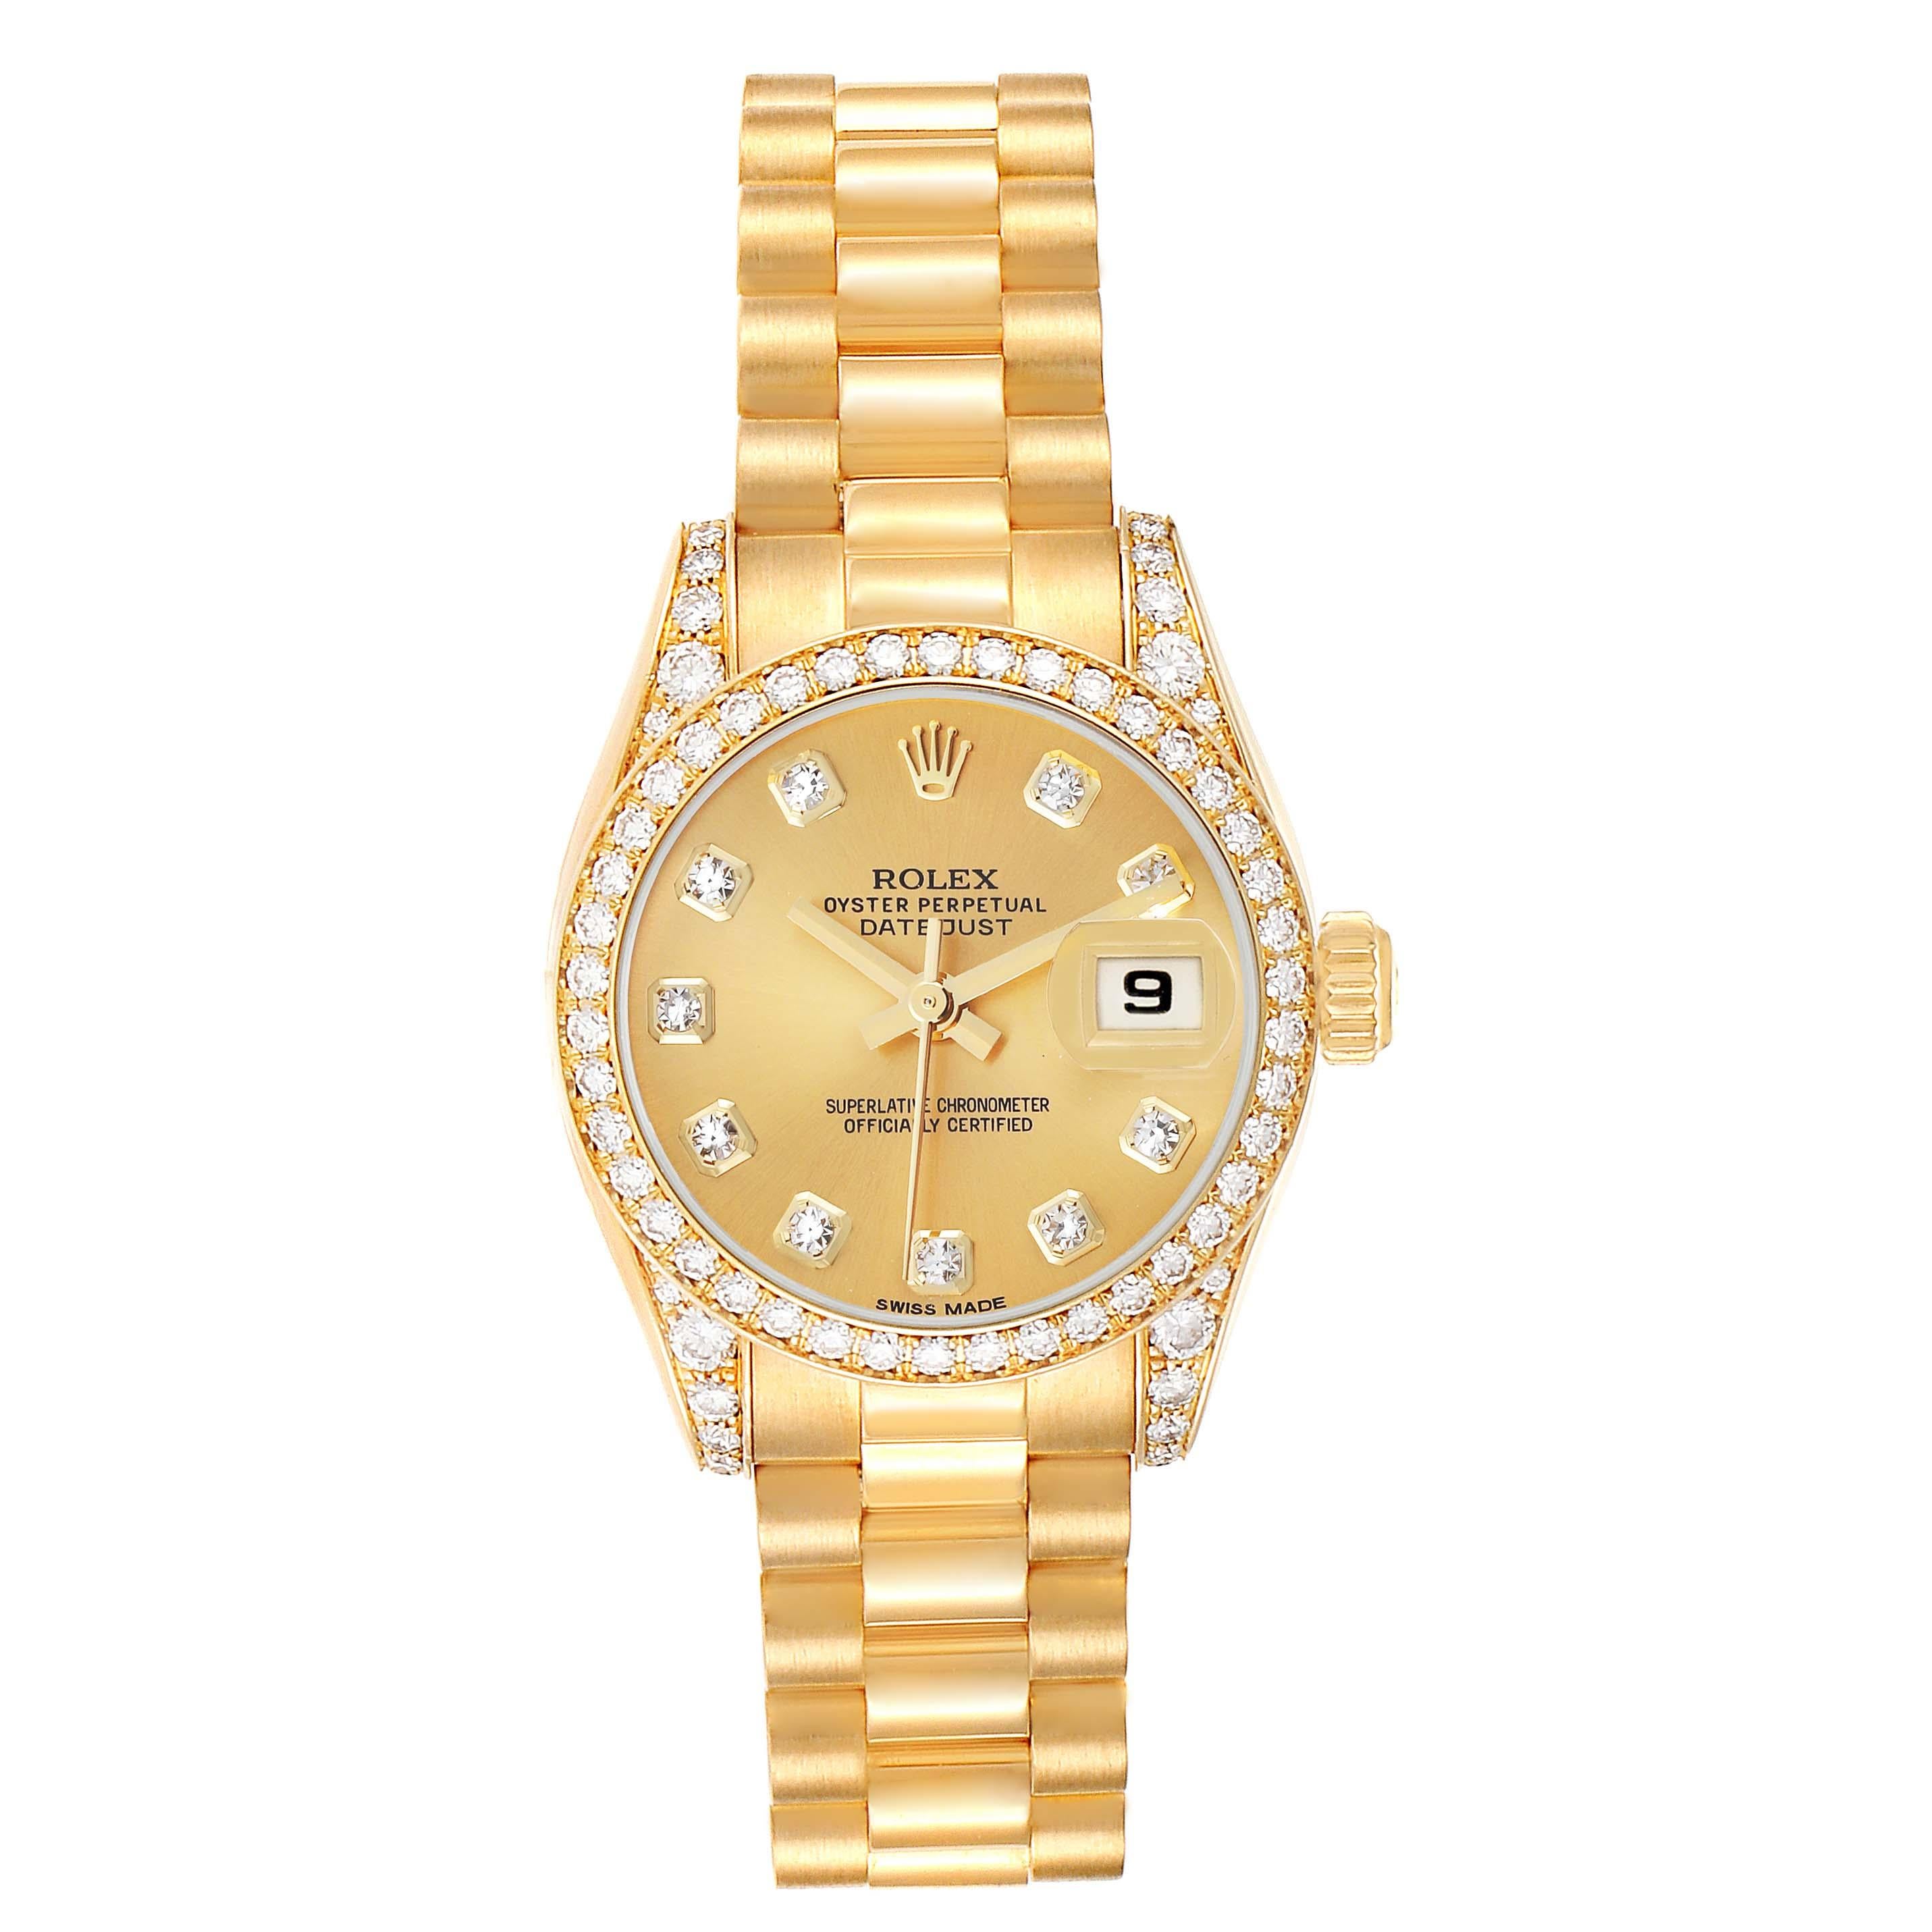 Rolex President Datejust Yellow Gold Diamond Ladies Watch 179158 Box Card. Officially certified chronometer automatic self-winding movement. 18k yellow gold oyster case 26.0 mm in diameter. Rolex logo on the crown. Original Rolex factory diamond